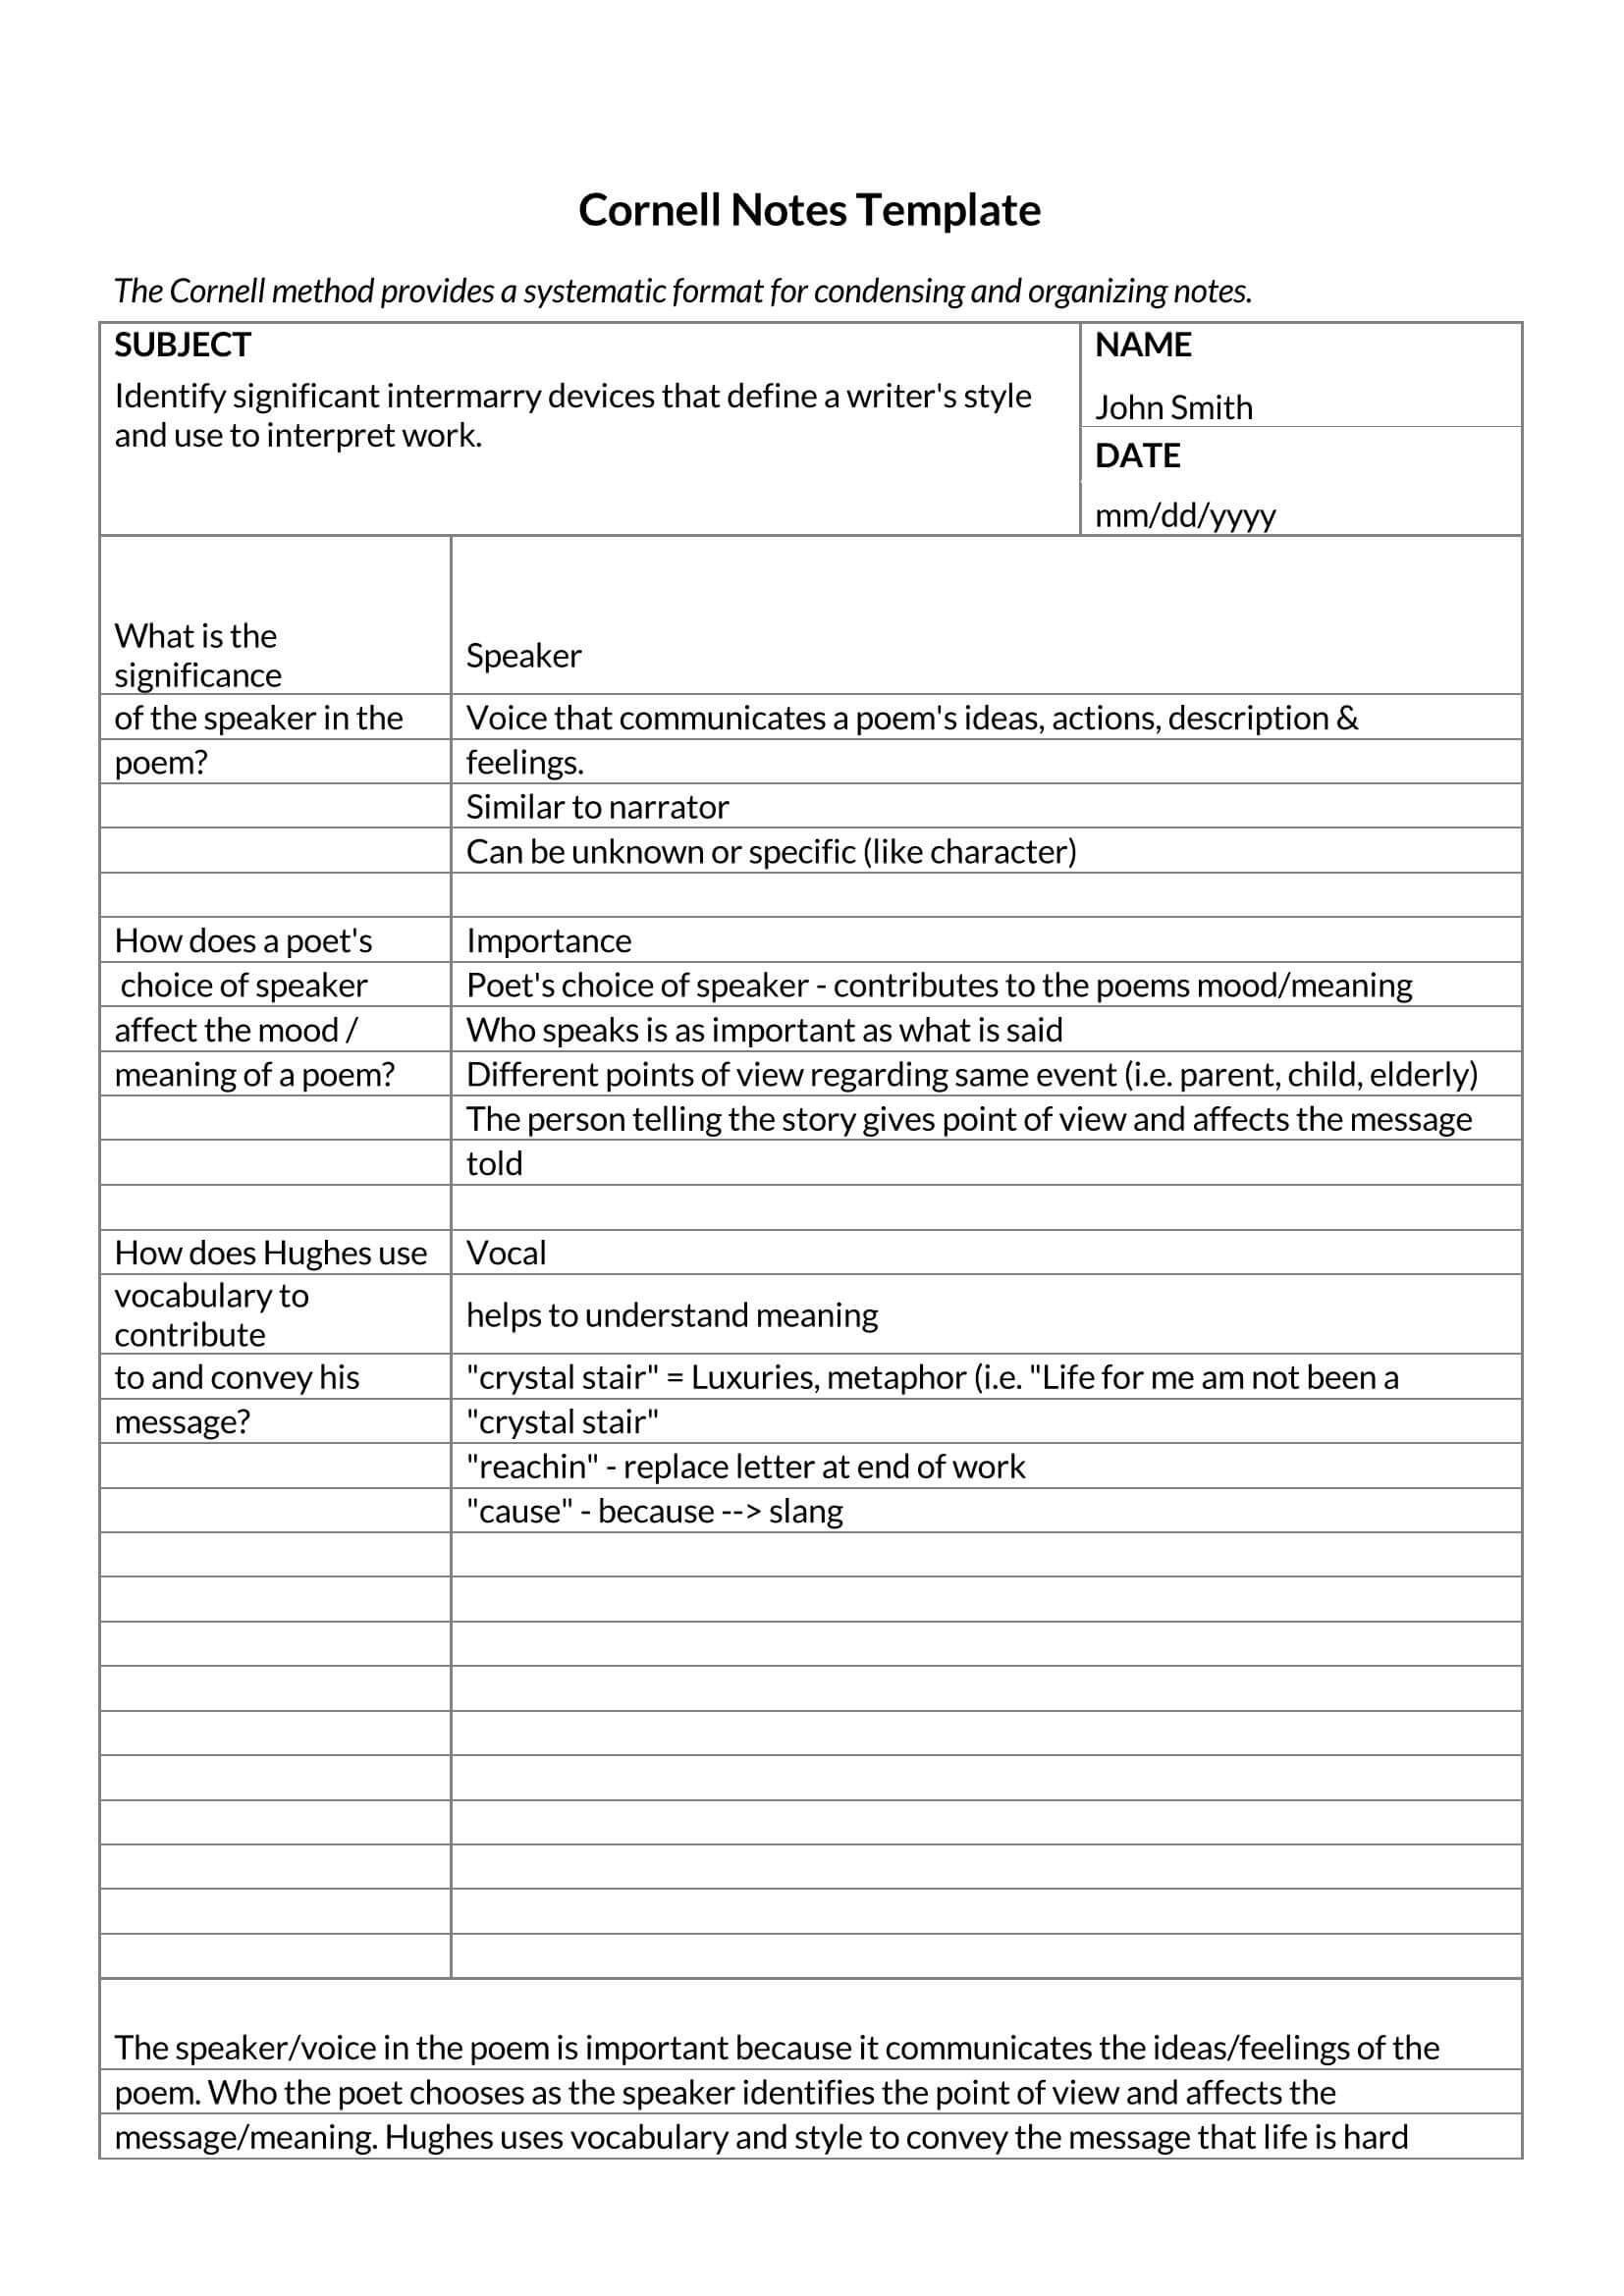 Free Cornell Note Template Sample